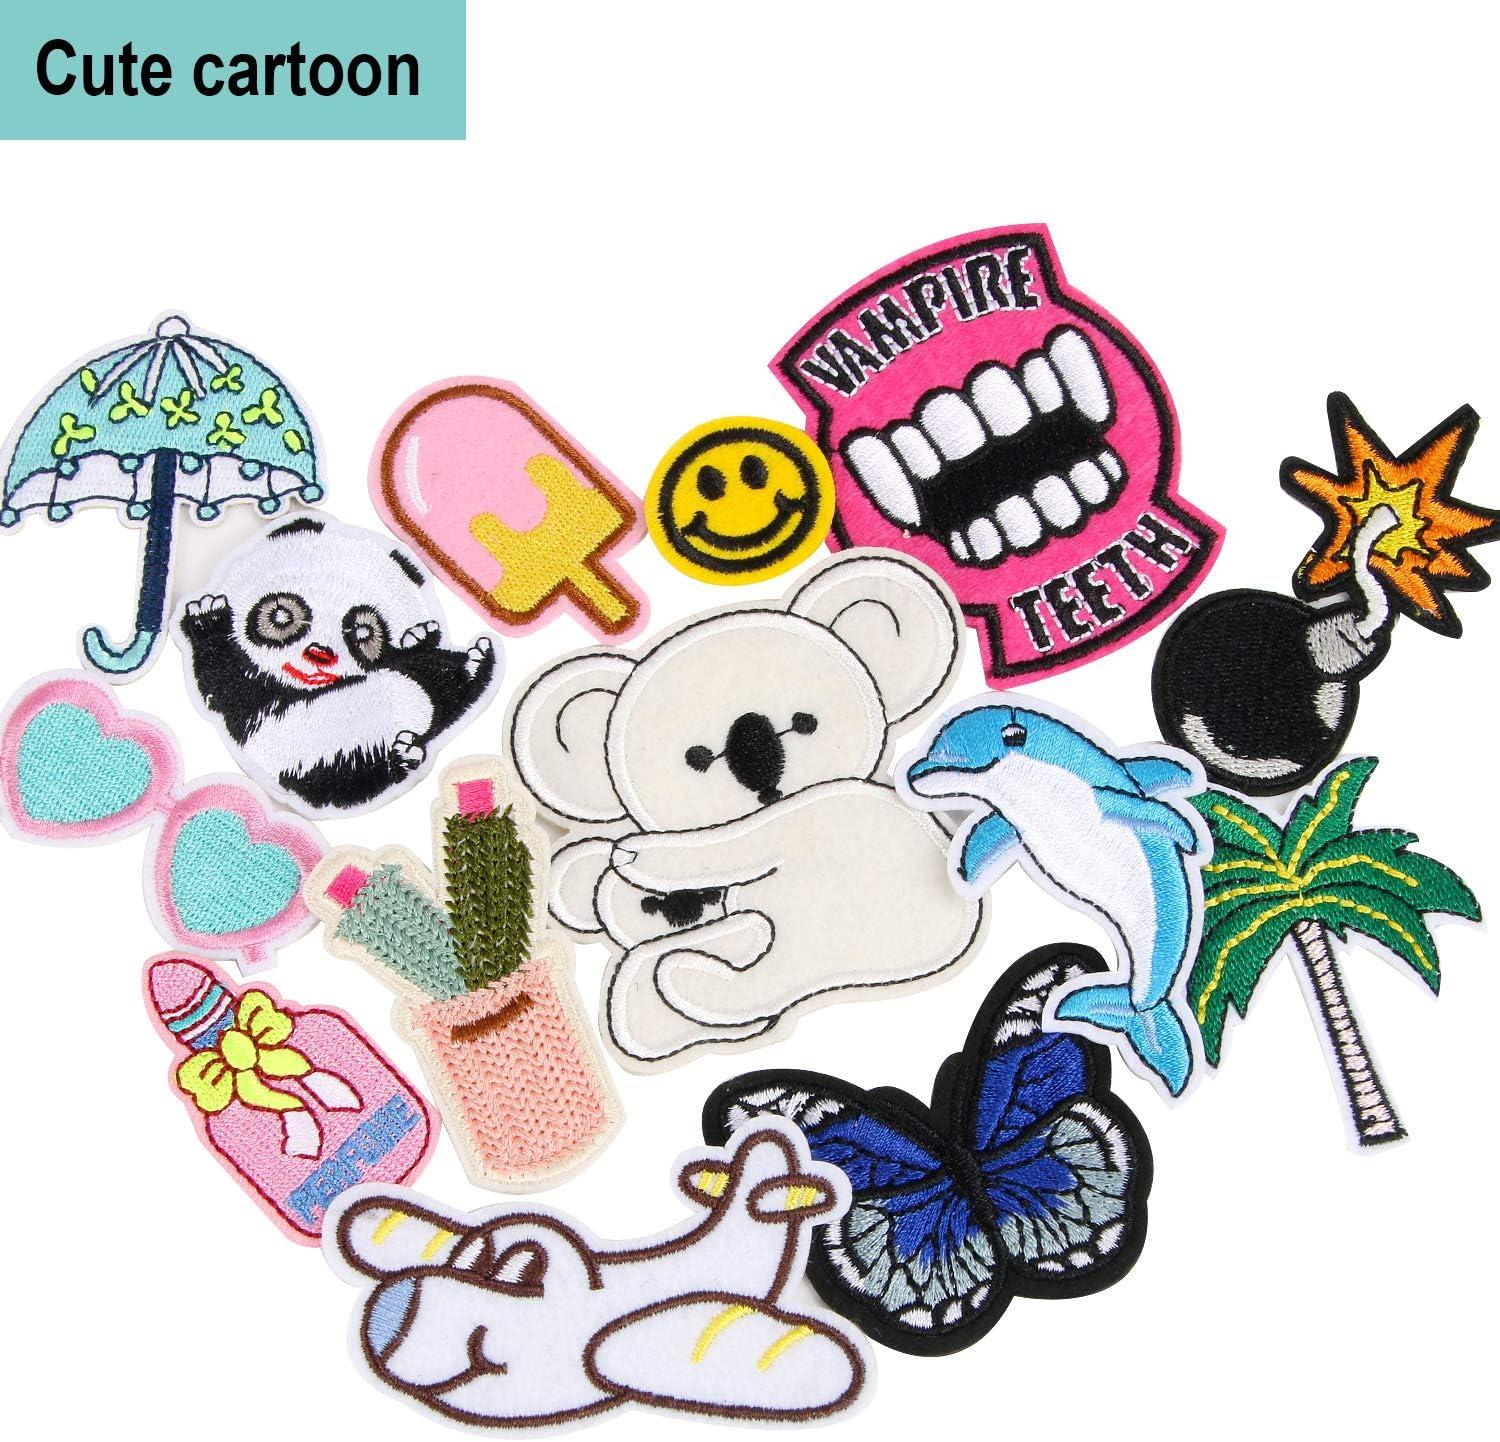  12 Pieces Embroidered Iron On Patches DIY Accessories, Bright  Colors, Cute Iron On Patch Applique for Clothes, Dress, Hats, Jeans, Bag,  Backpack, DIY Accessories Embroidered Iron on Patches : Arts, Crafts